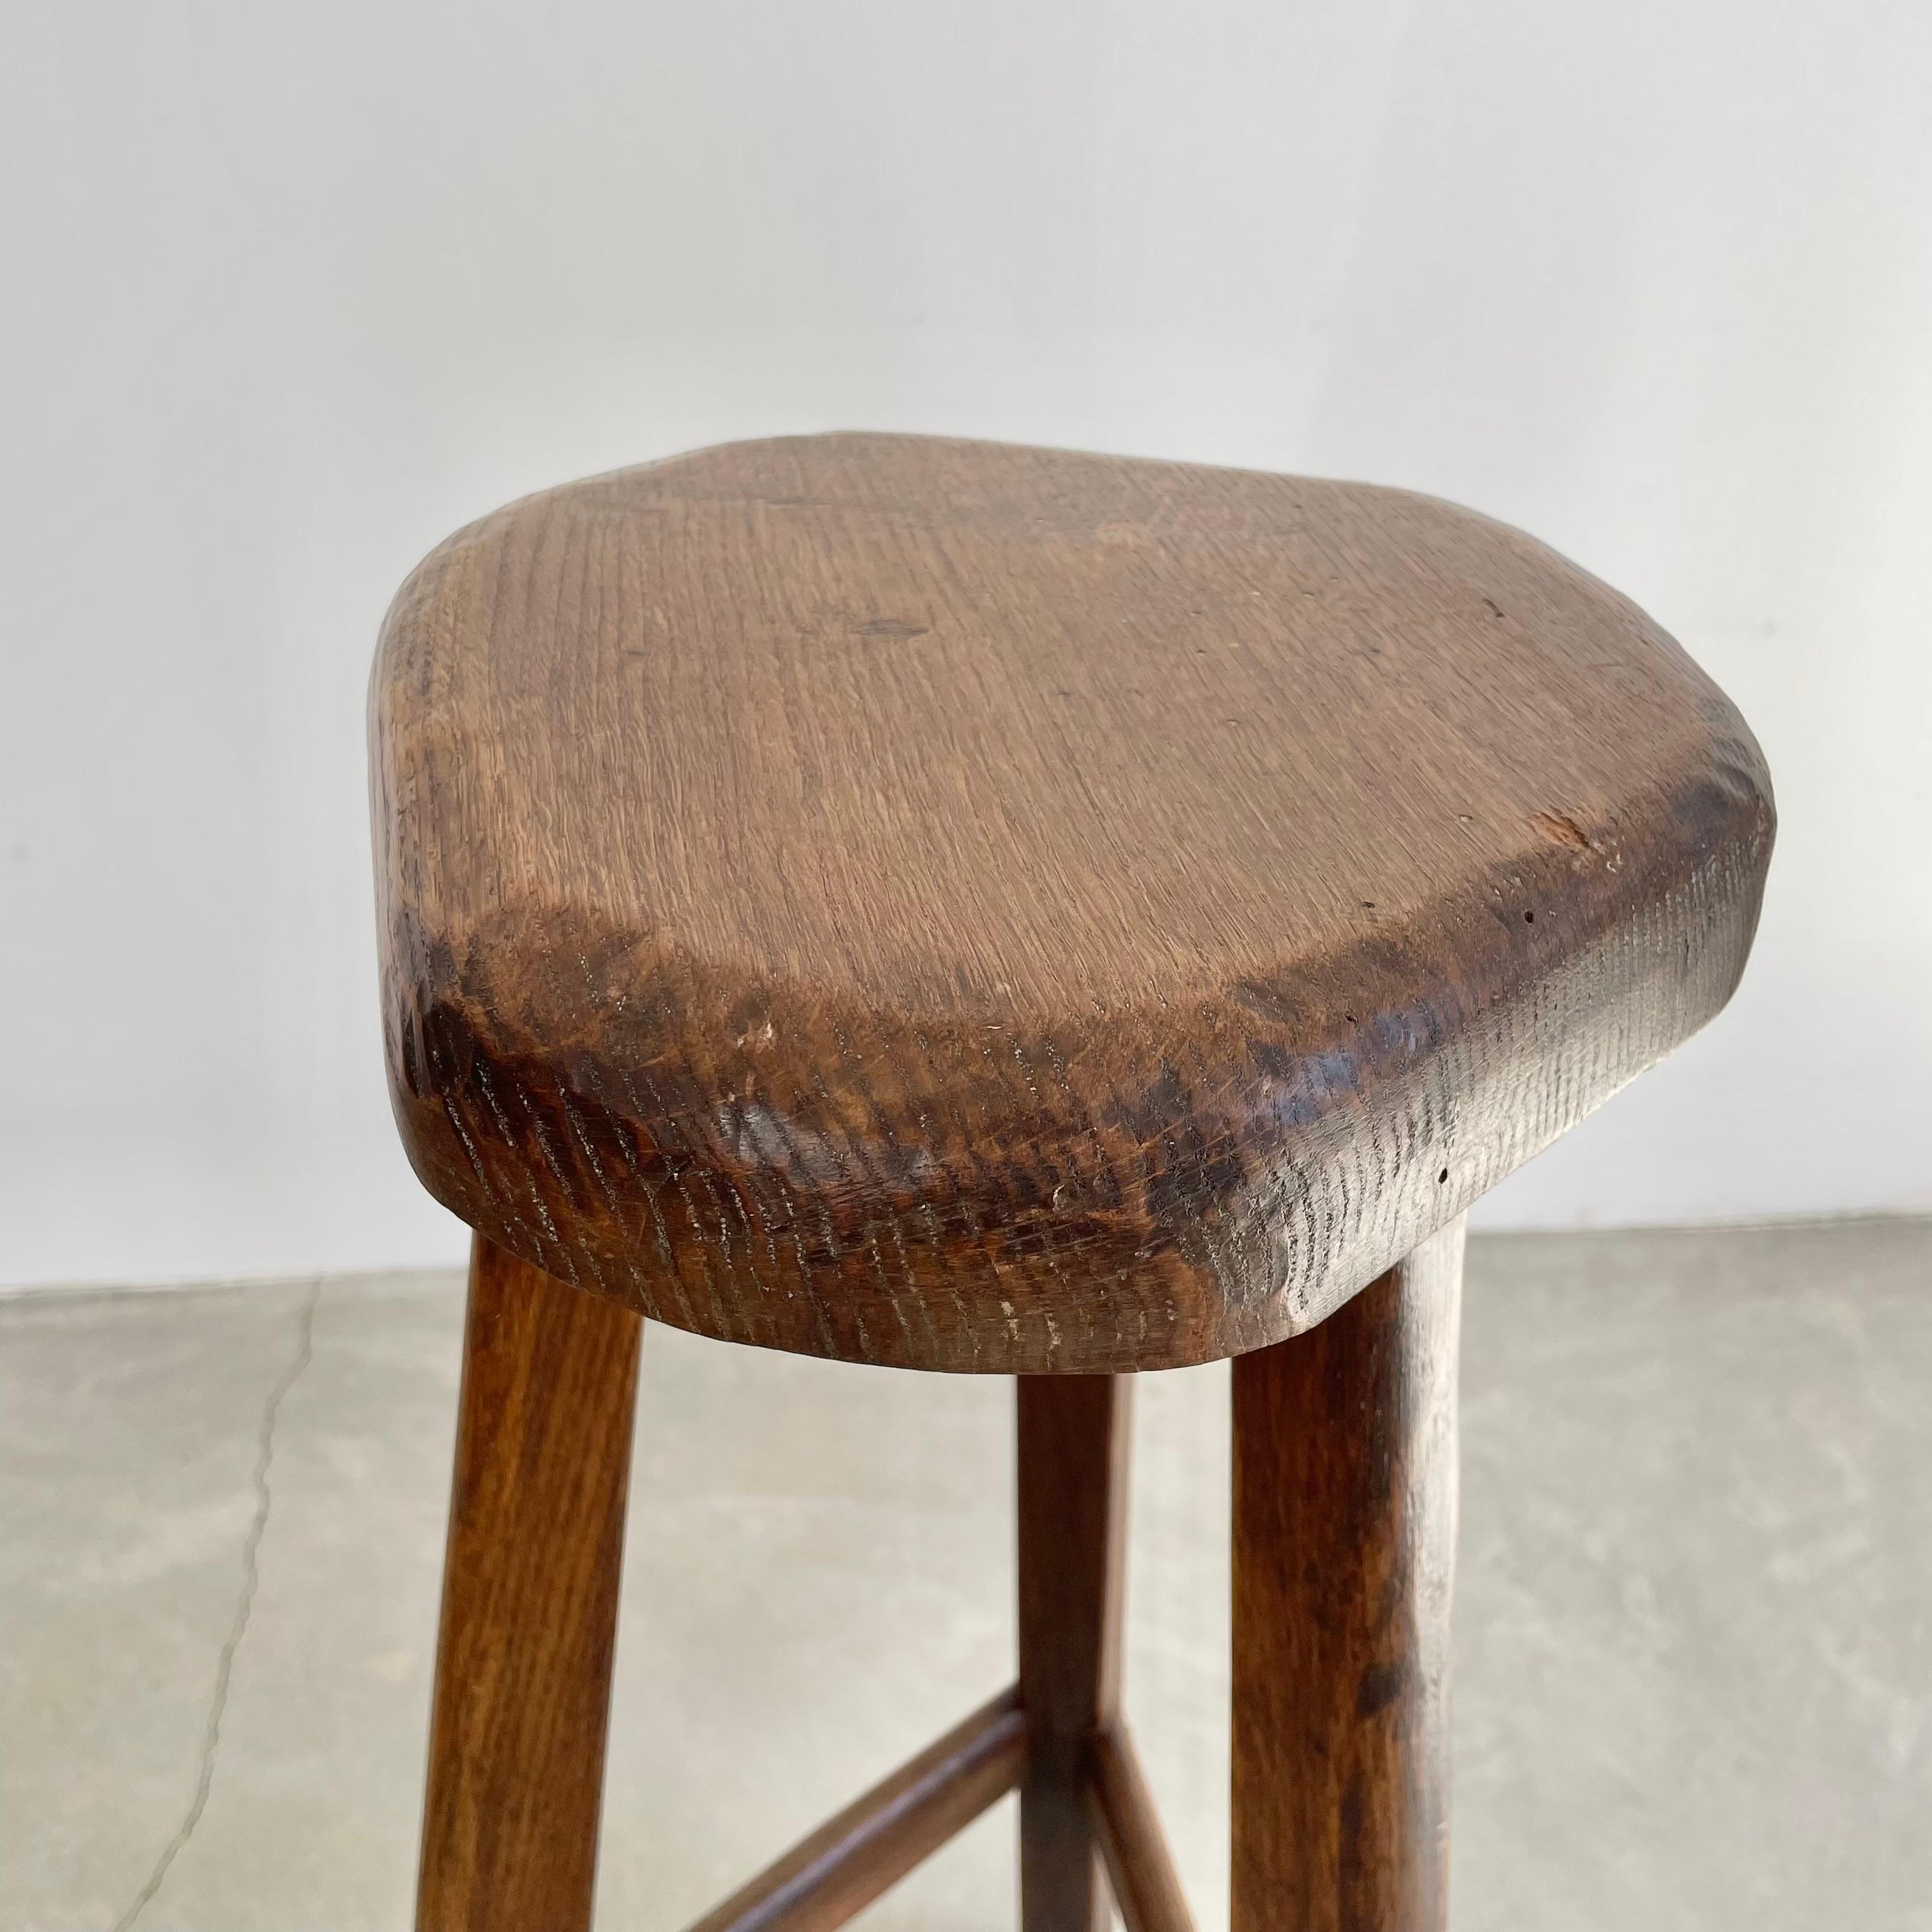 Pair of Tall Brutalist Wood Stools, 1960s France For Sale 4